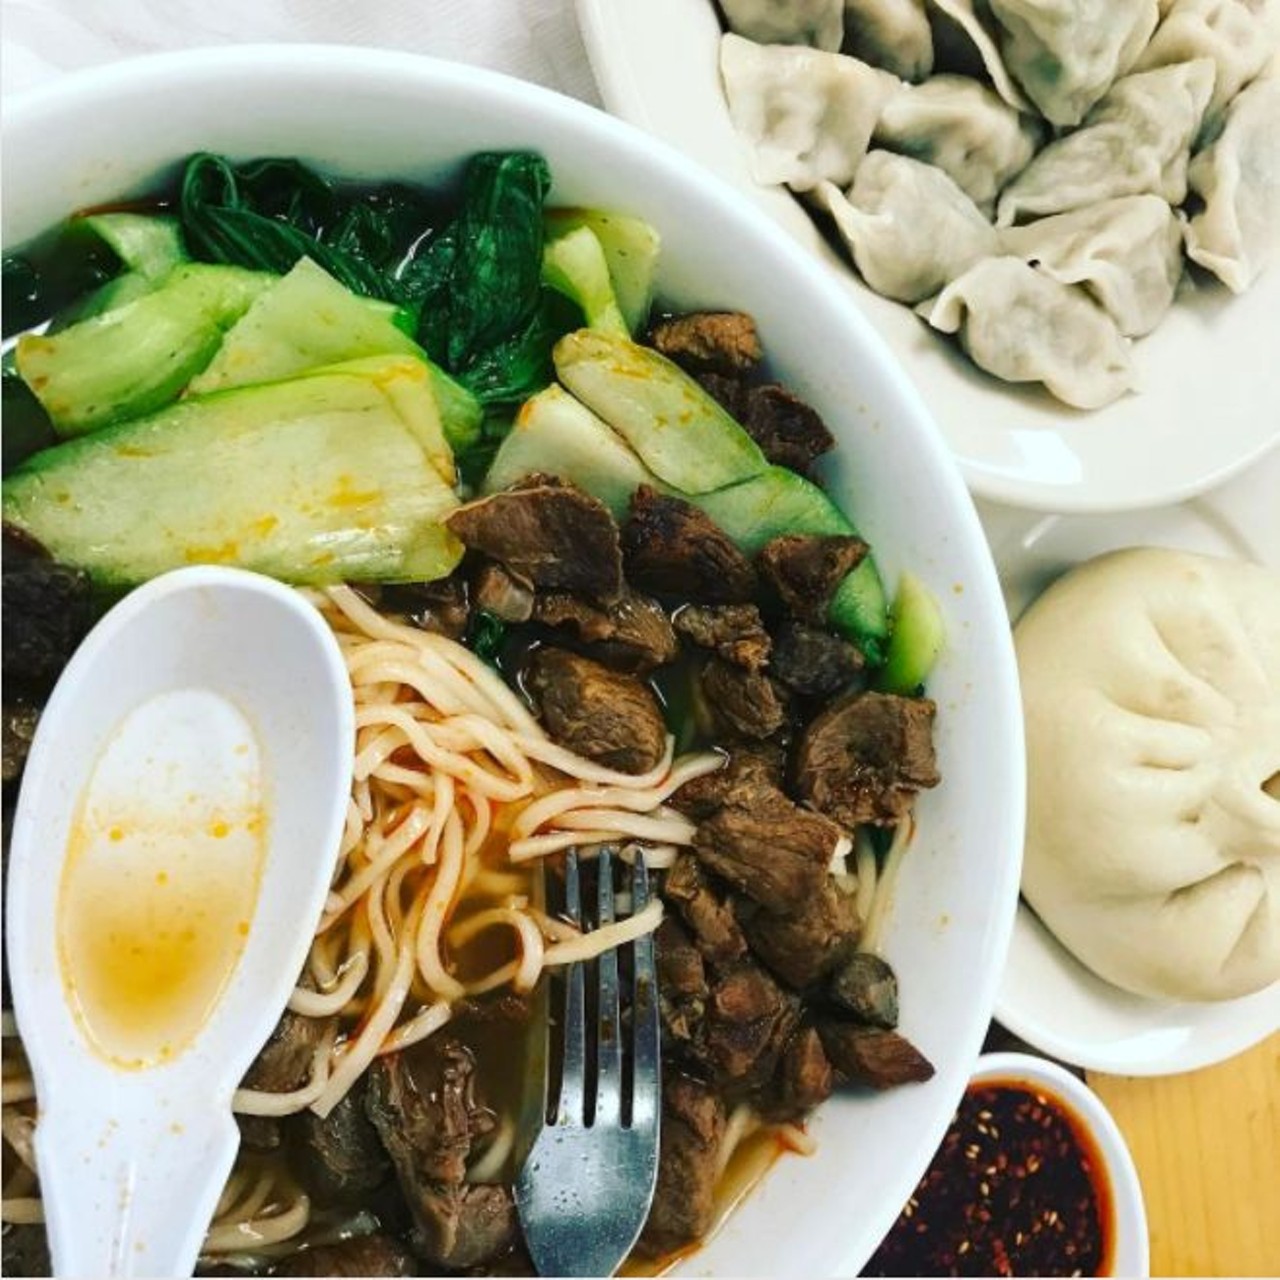 Kungfu Noodle
6733 Bandera Road, (210) 451-5586
The hand-pulled noodles are key here. Try the lamb variety and prepare for some heat. 
Photo via Instagram, darbi13